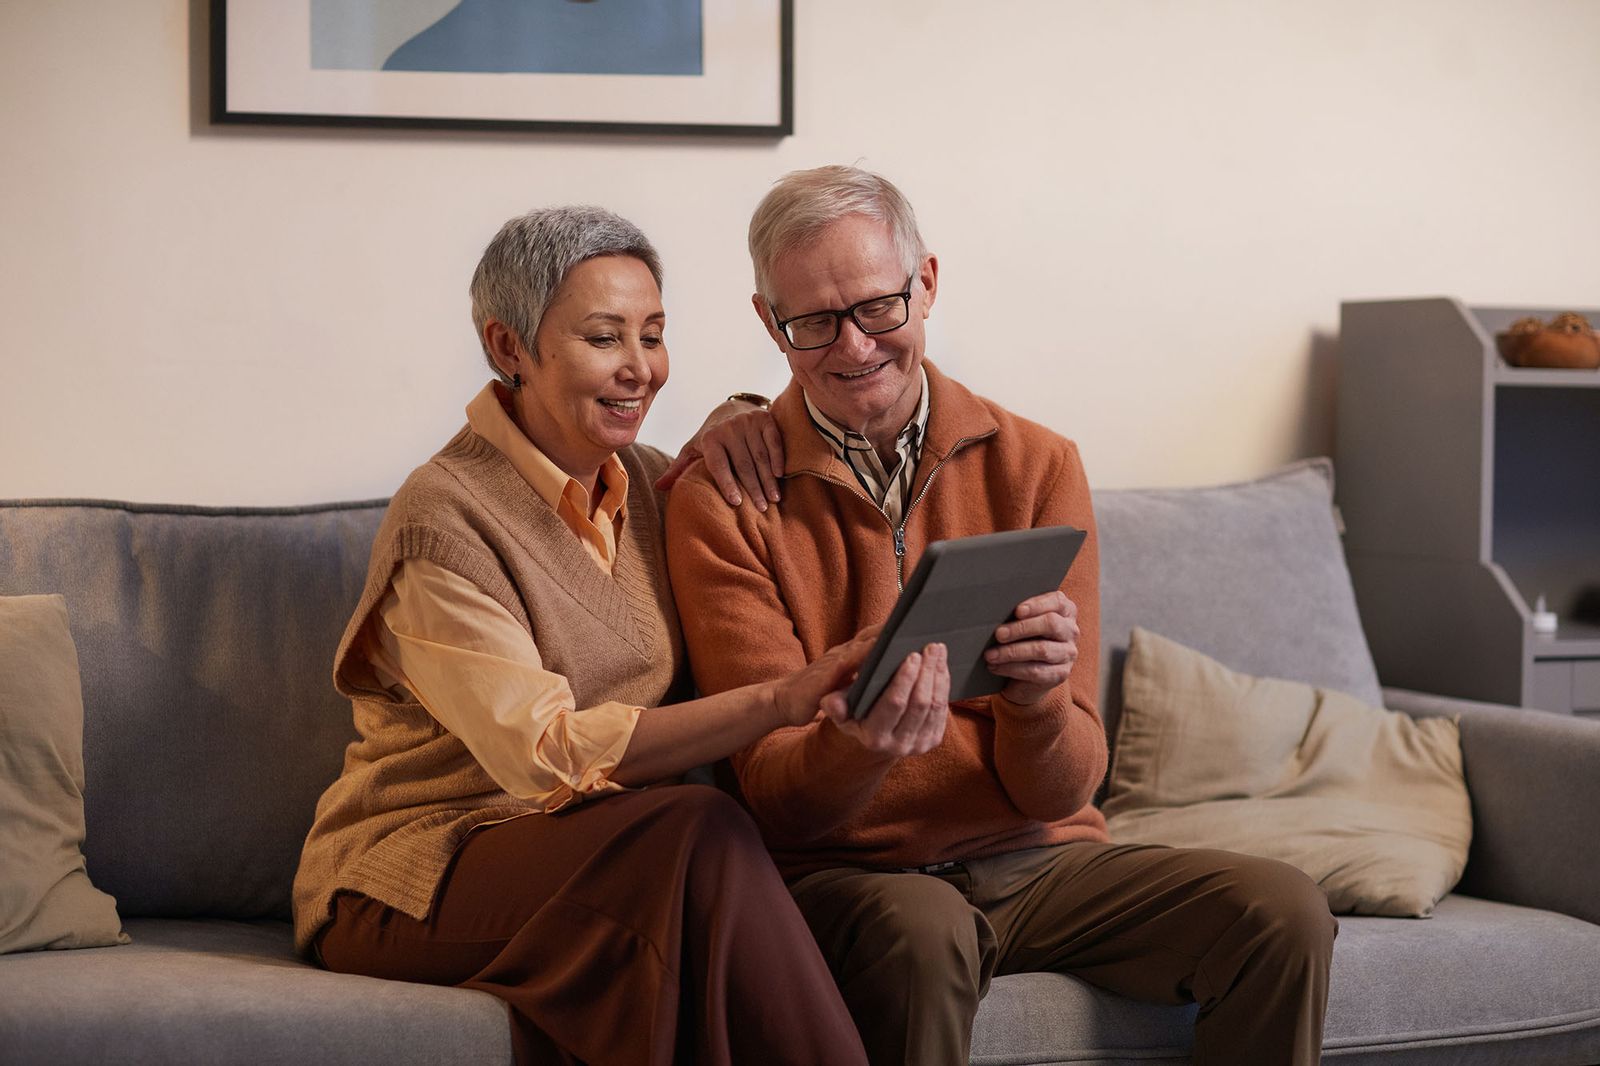 When Should a Seniors Sell Their Home?